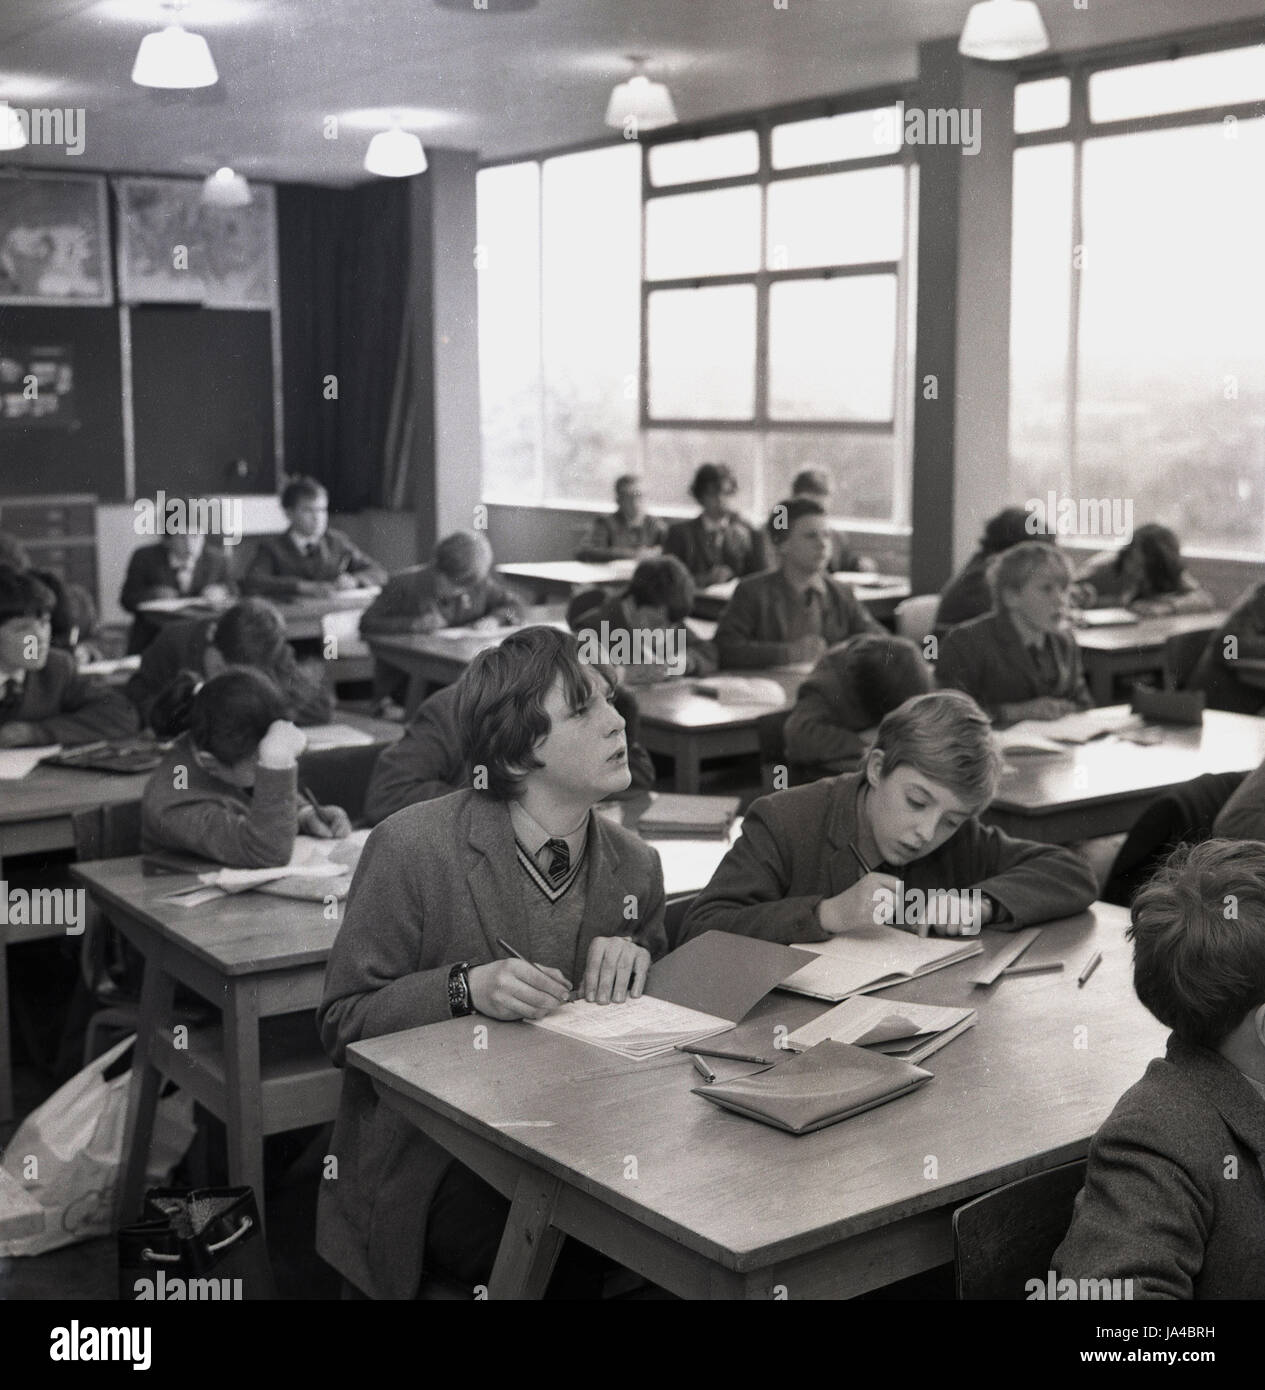 1960s, historical, students sharing desk space in a classroom at Sedgehill School, Lewisham, South London, England, UK, opened in 1957 and one of the first comprehensive schools in Britian, Stock Photo